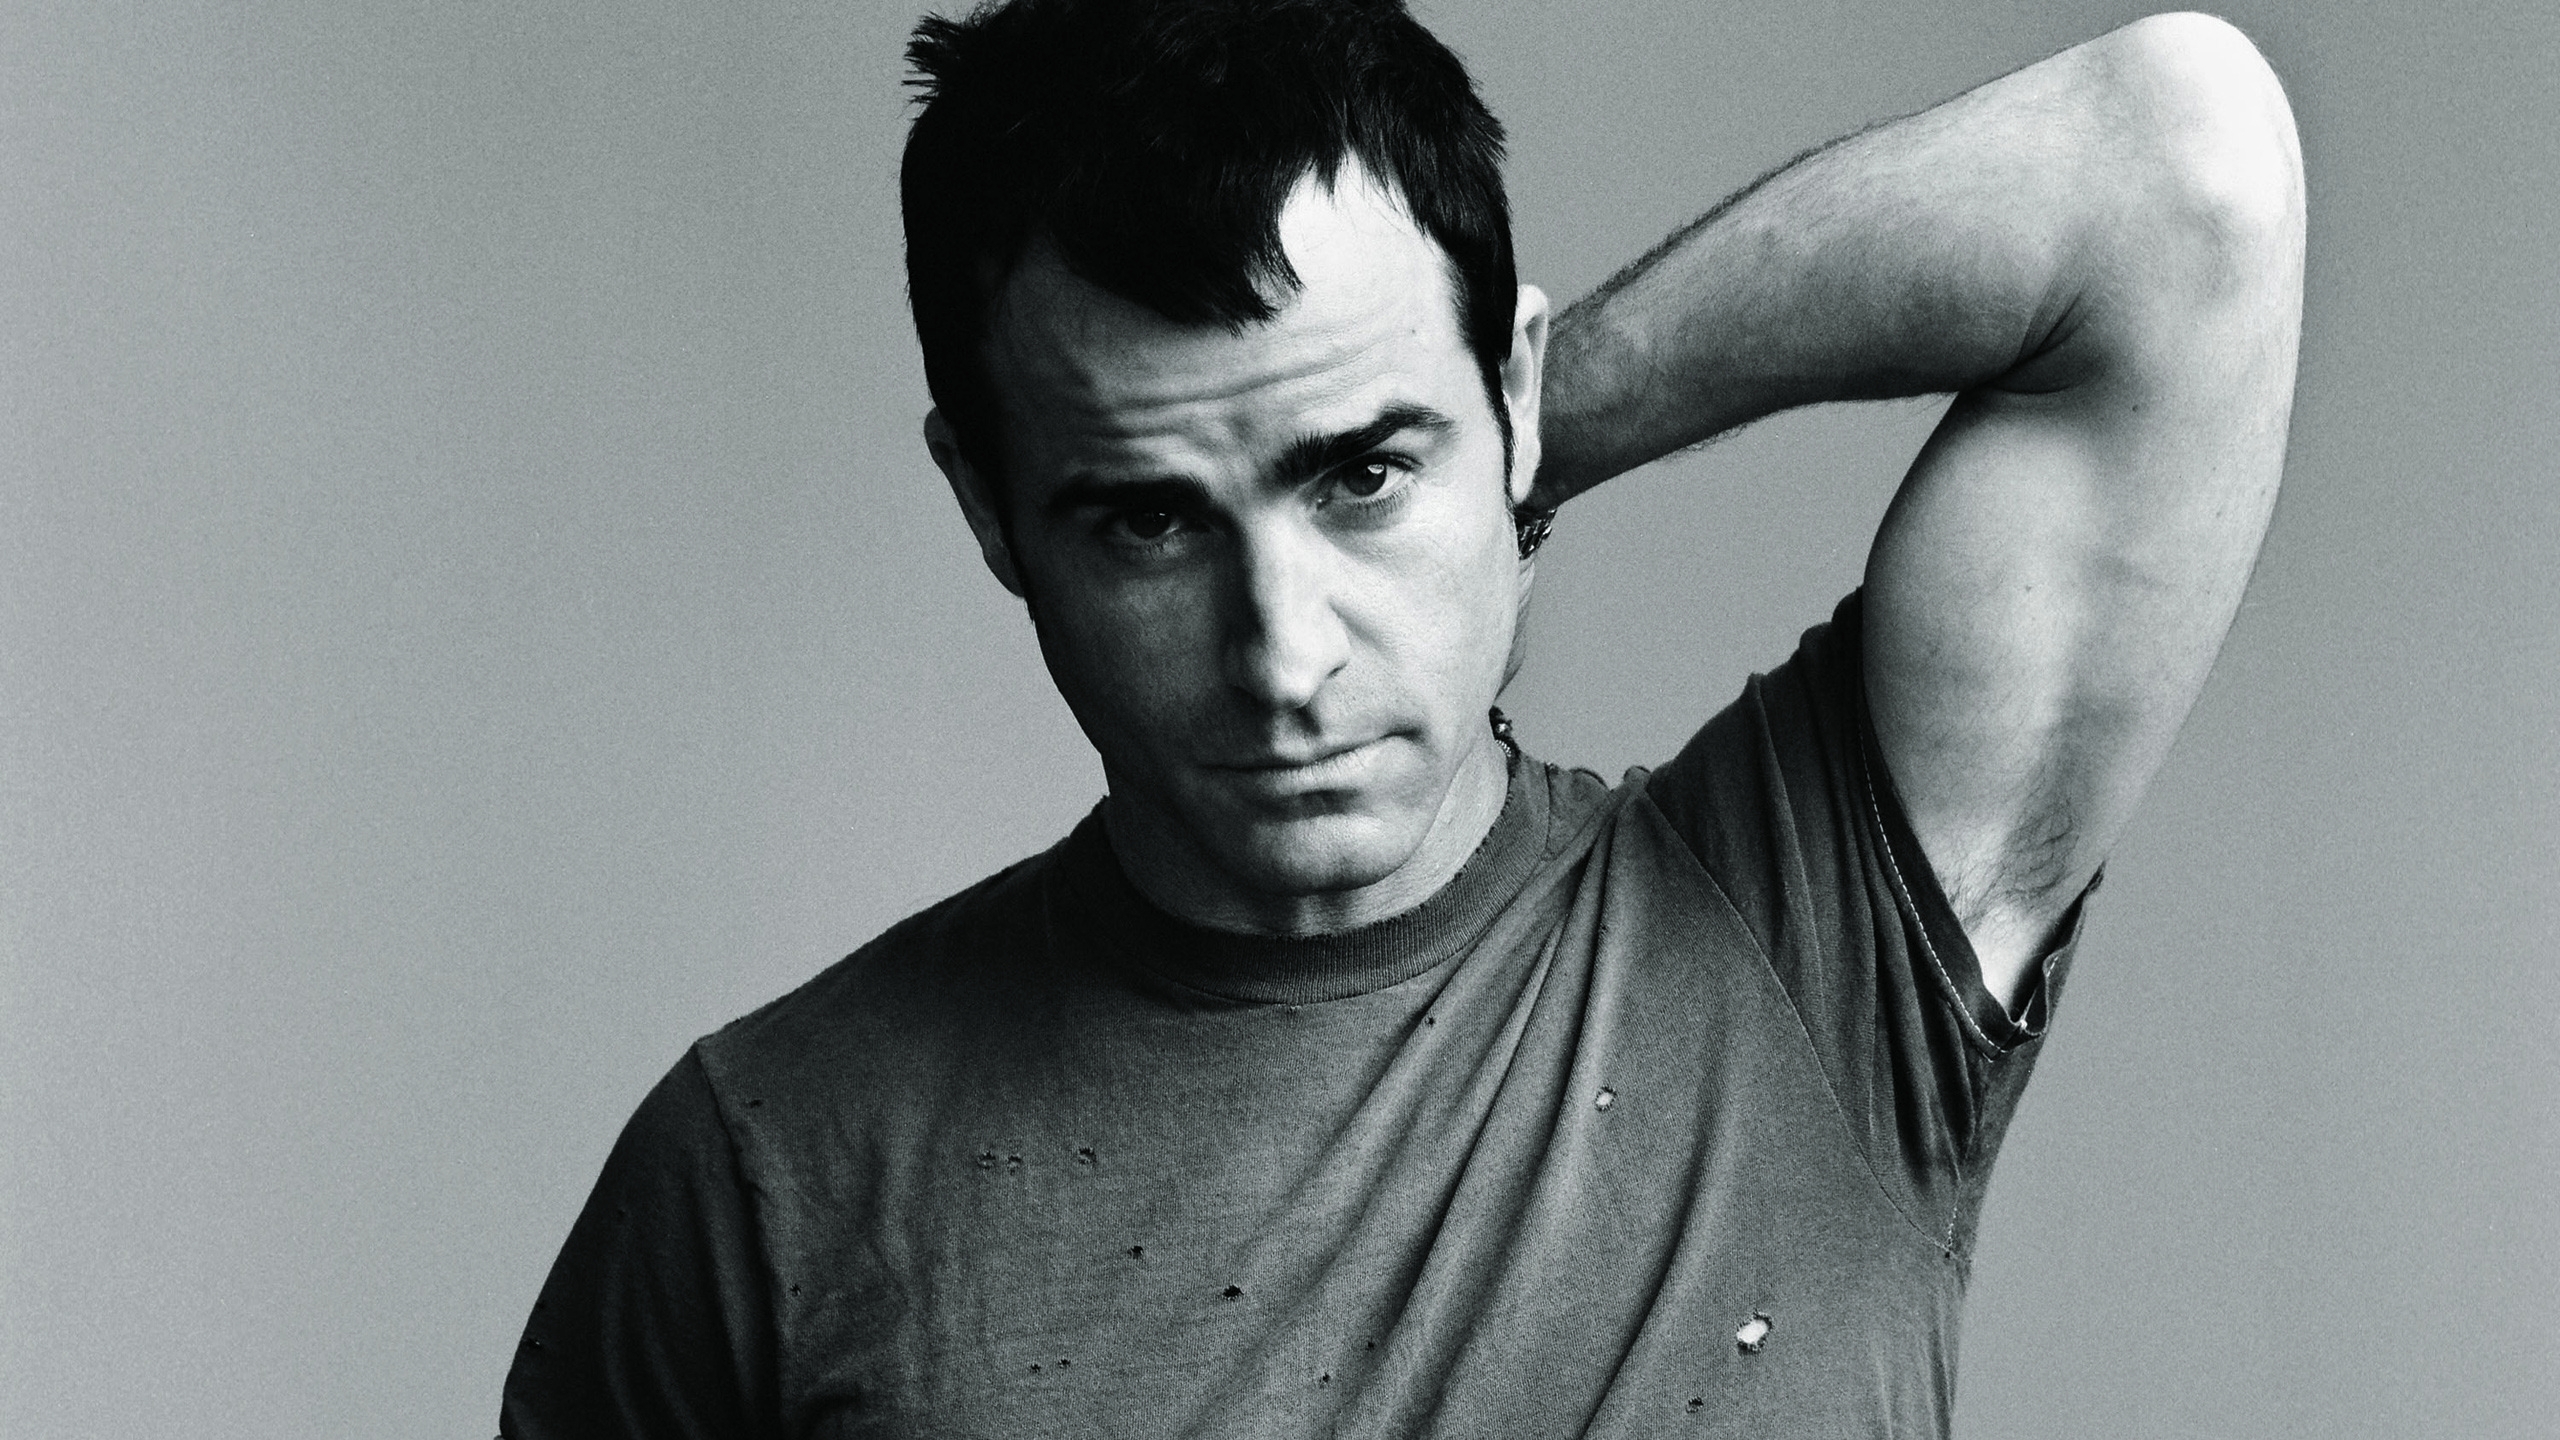 Justin Theroux Young Look for 2560x1440 HDTV resolution